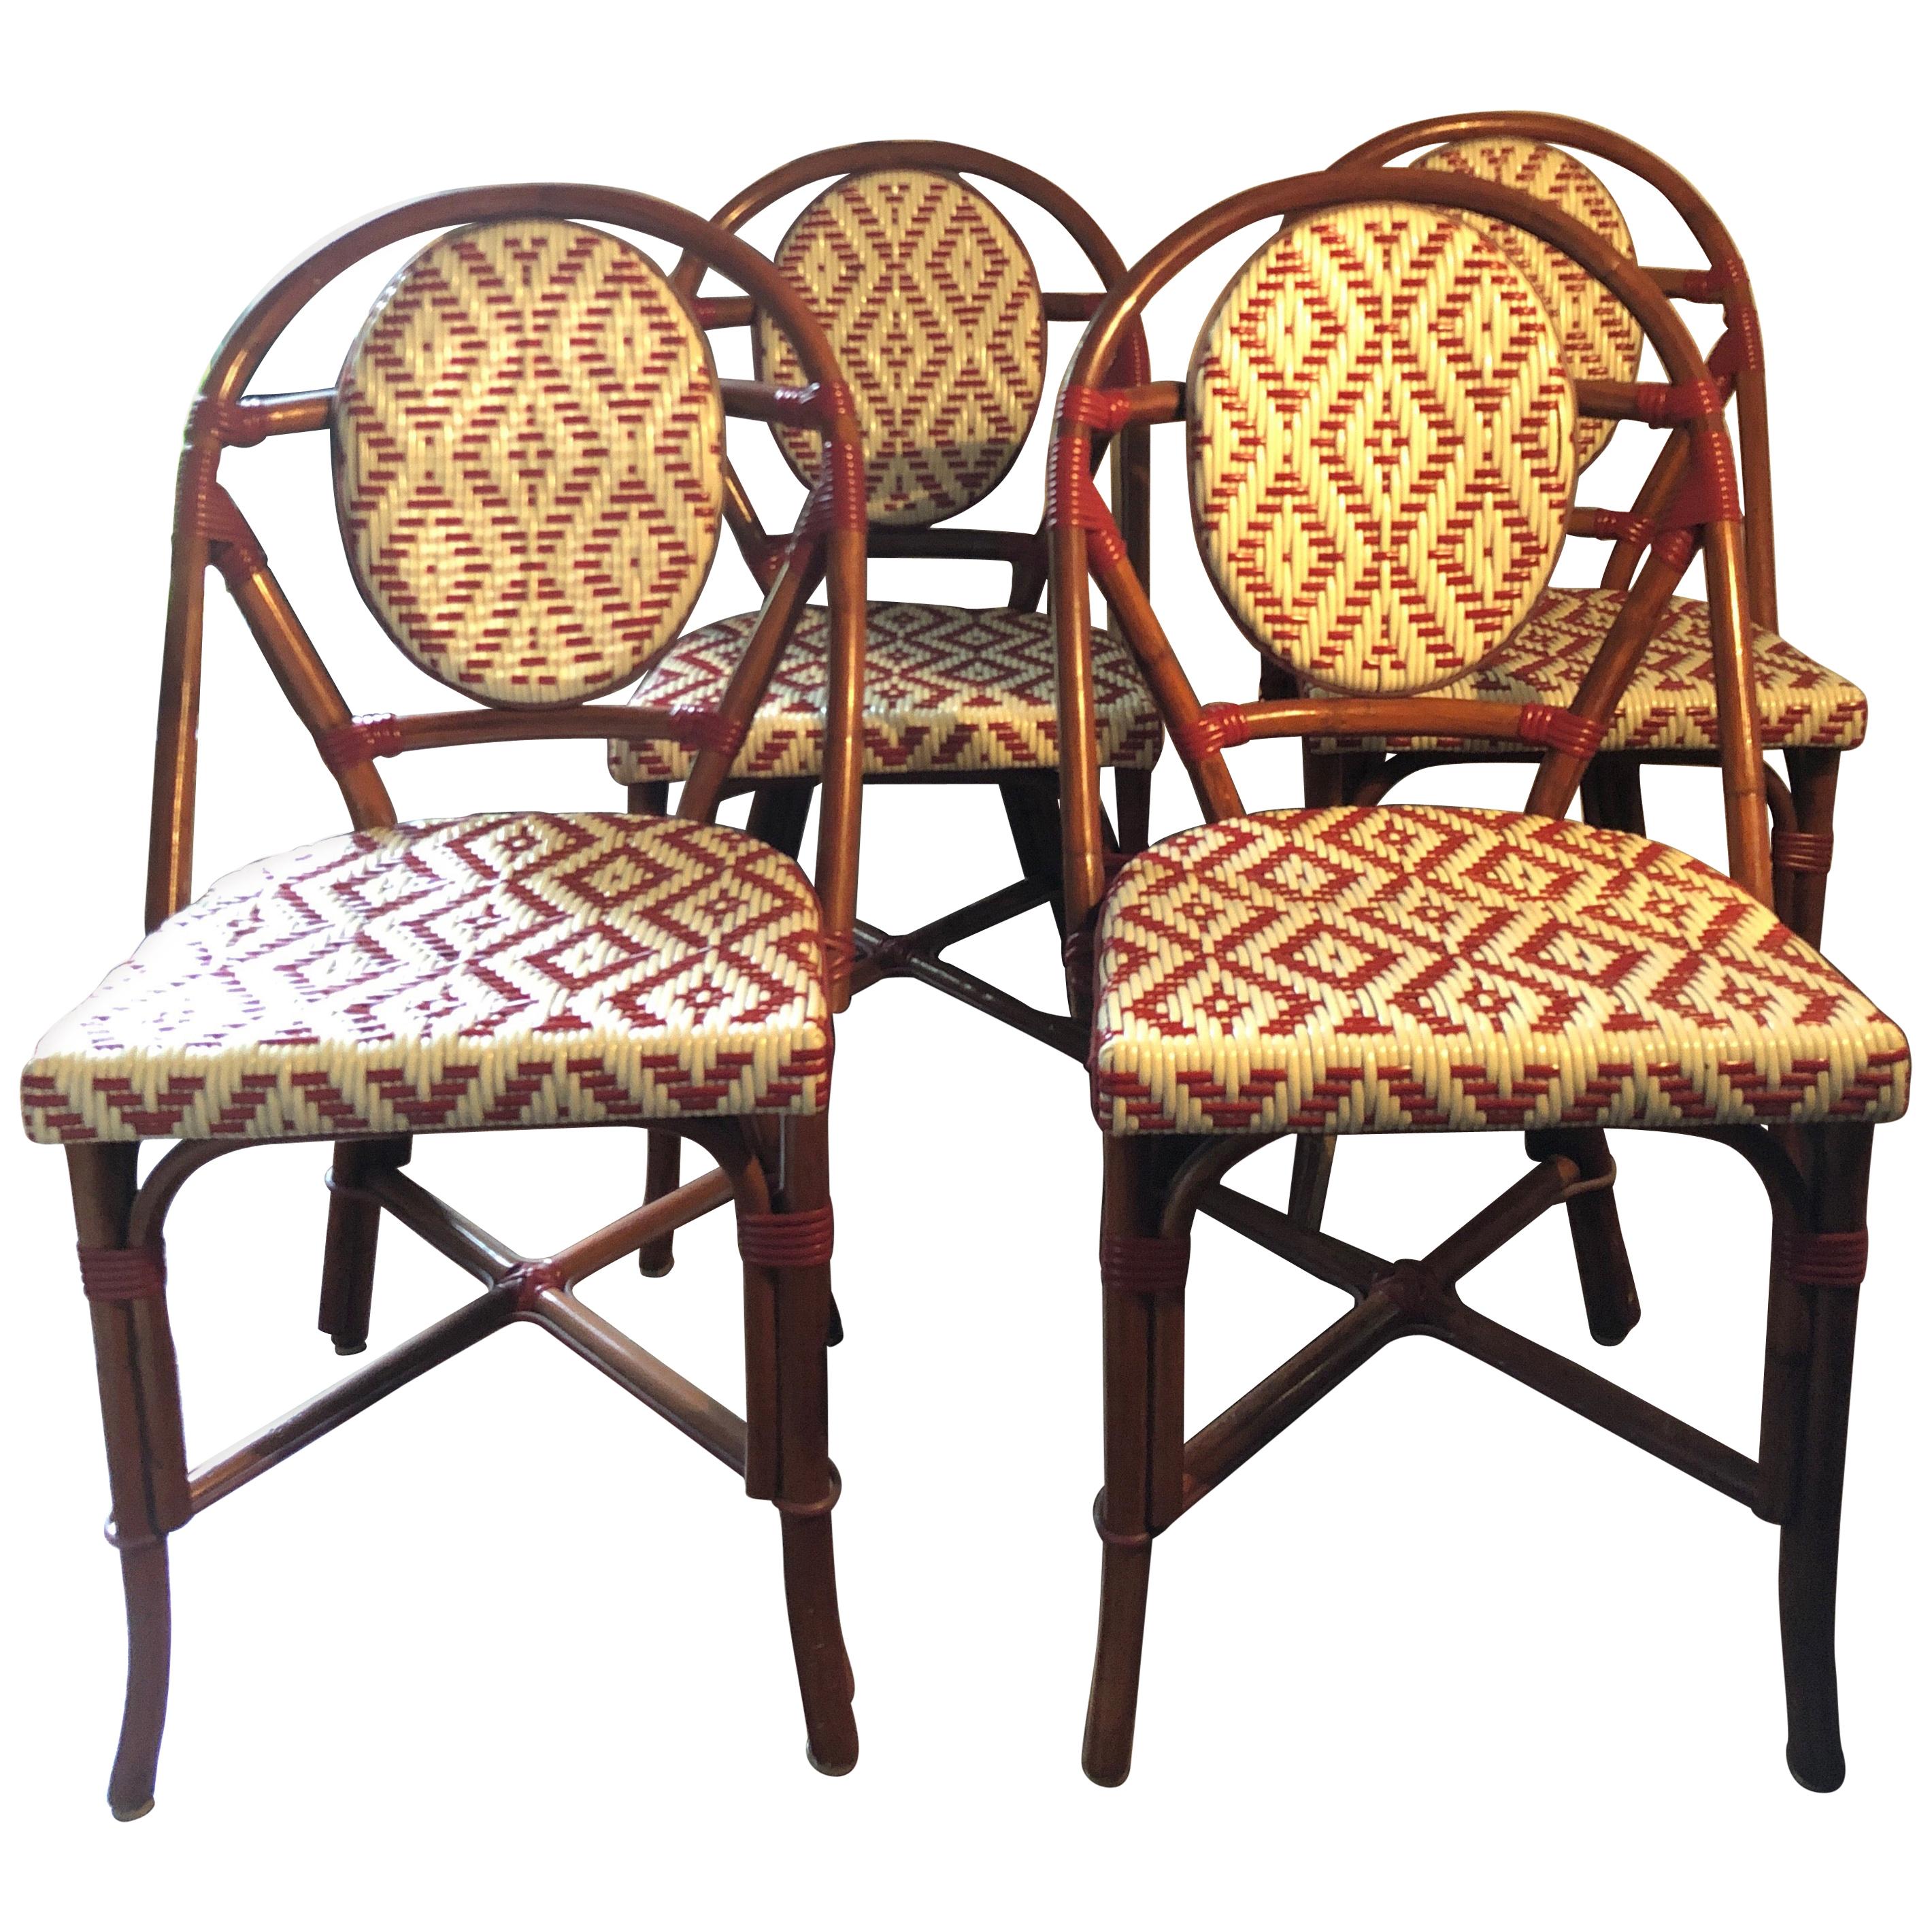 Set of 4 Palecek Rattan French Bistro Chairs, Red and White